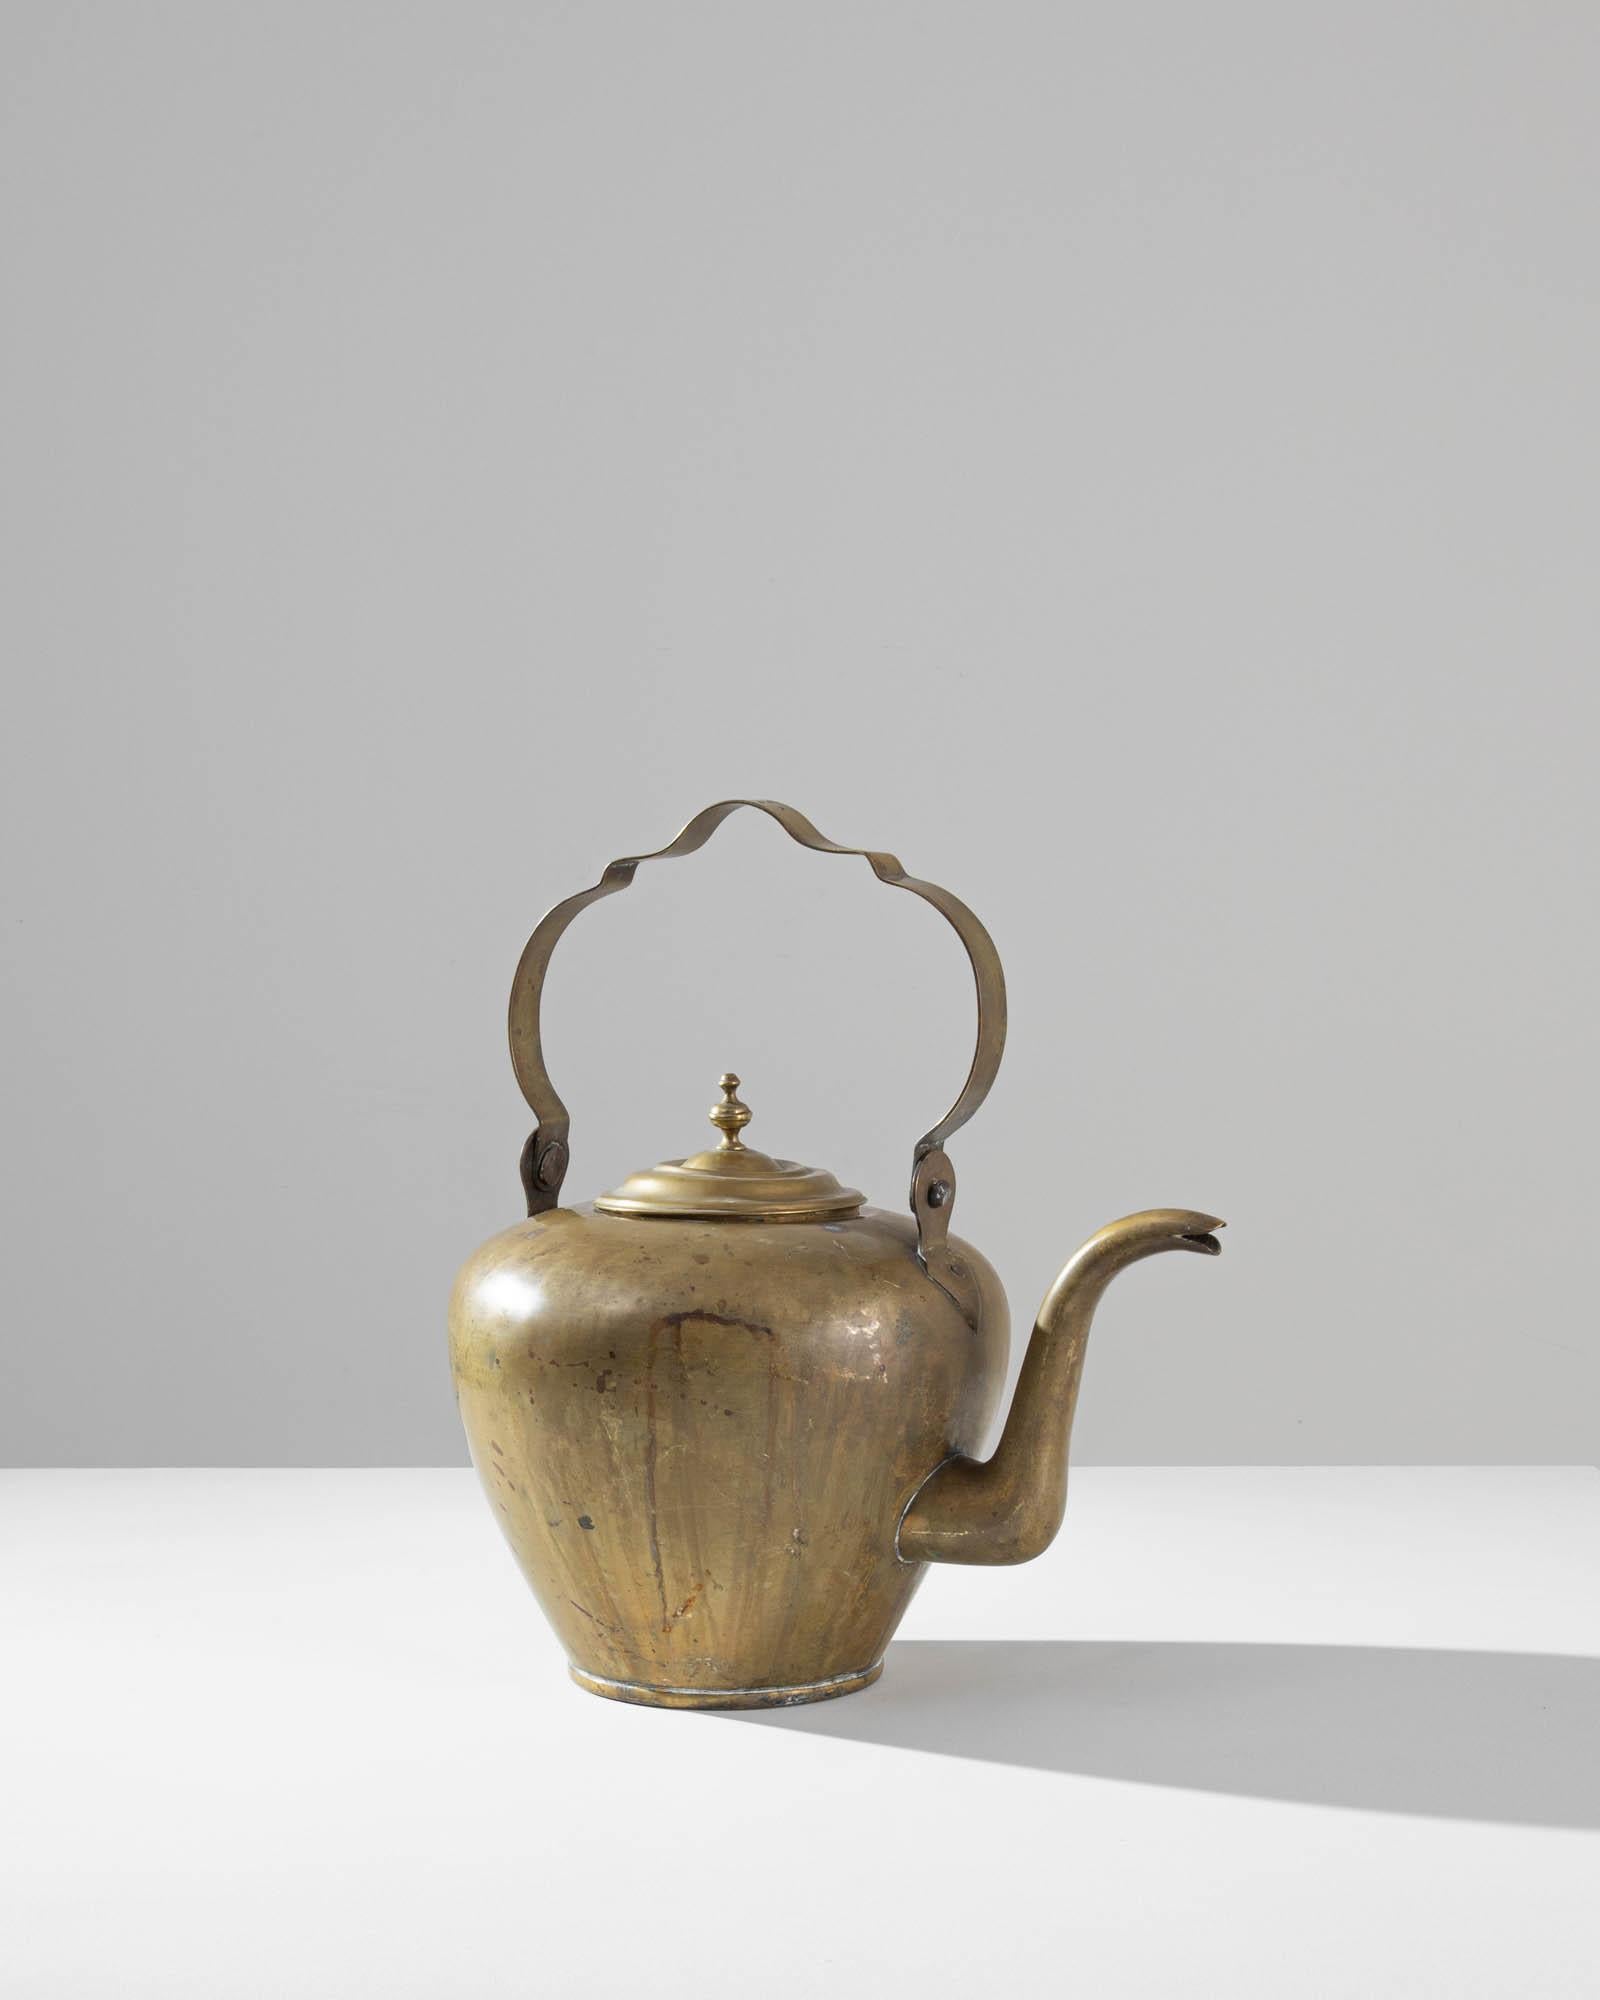 This elegant antique tea kettle makes a delightful addition to a kitchen. Made in France in the 1800s, the shape of the tall handle indicates that this piece would have originally been hung over a fire. Little details of the design—the graceful